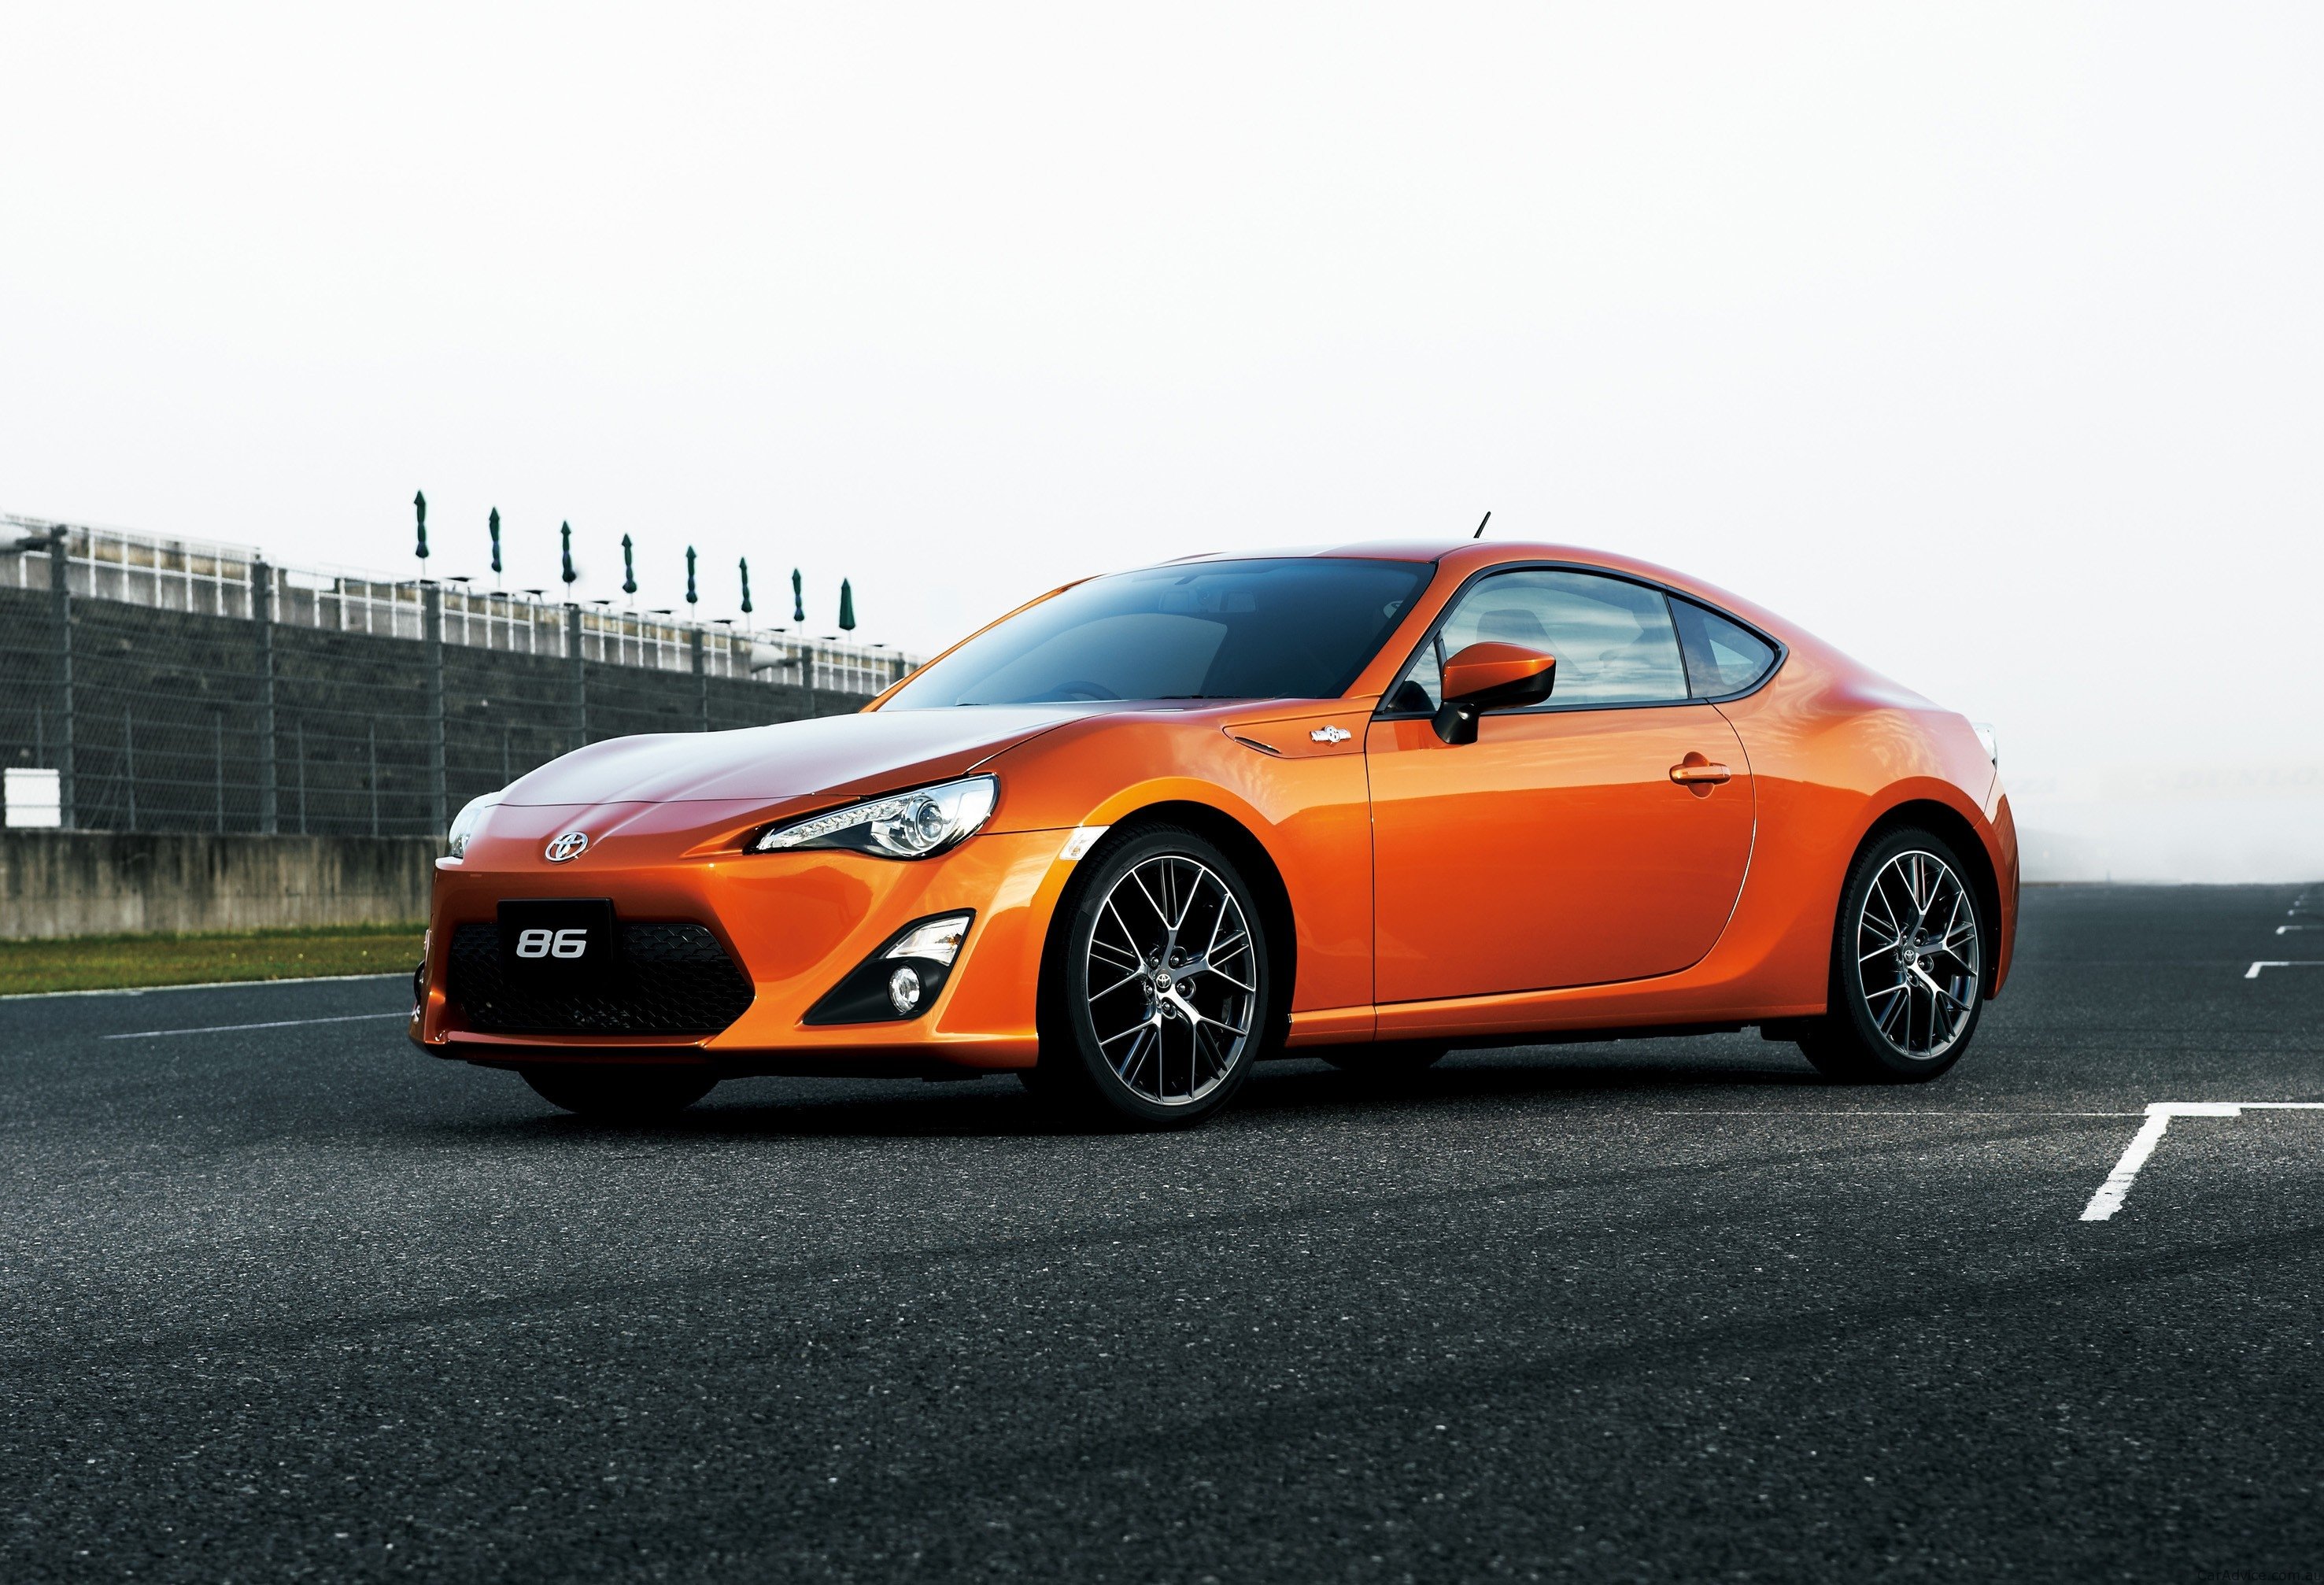 toyota-86-sports-car-revealed-official-pictures-details-photos-1